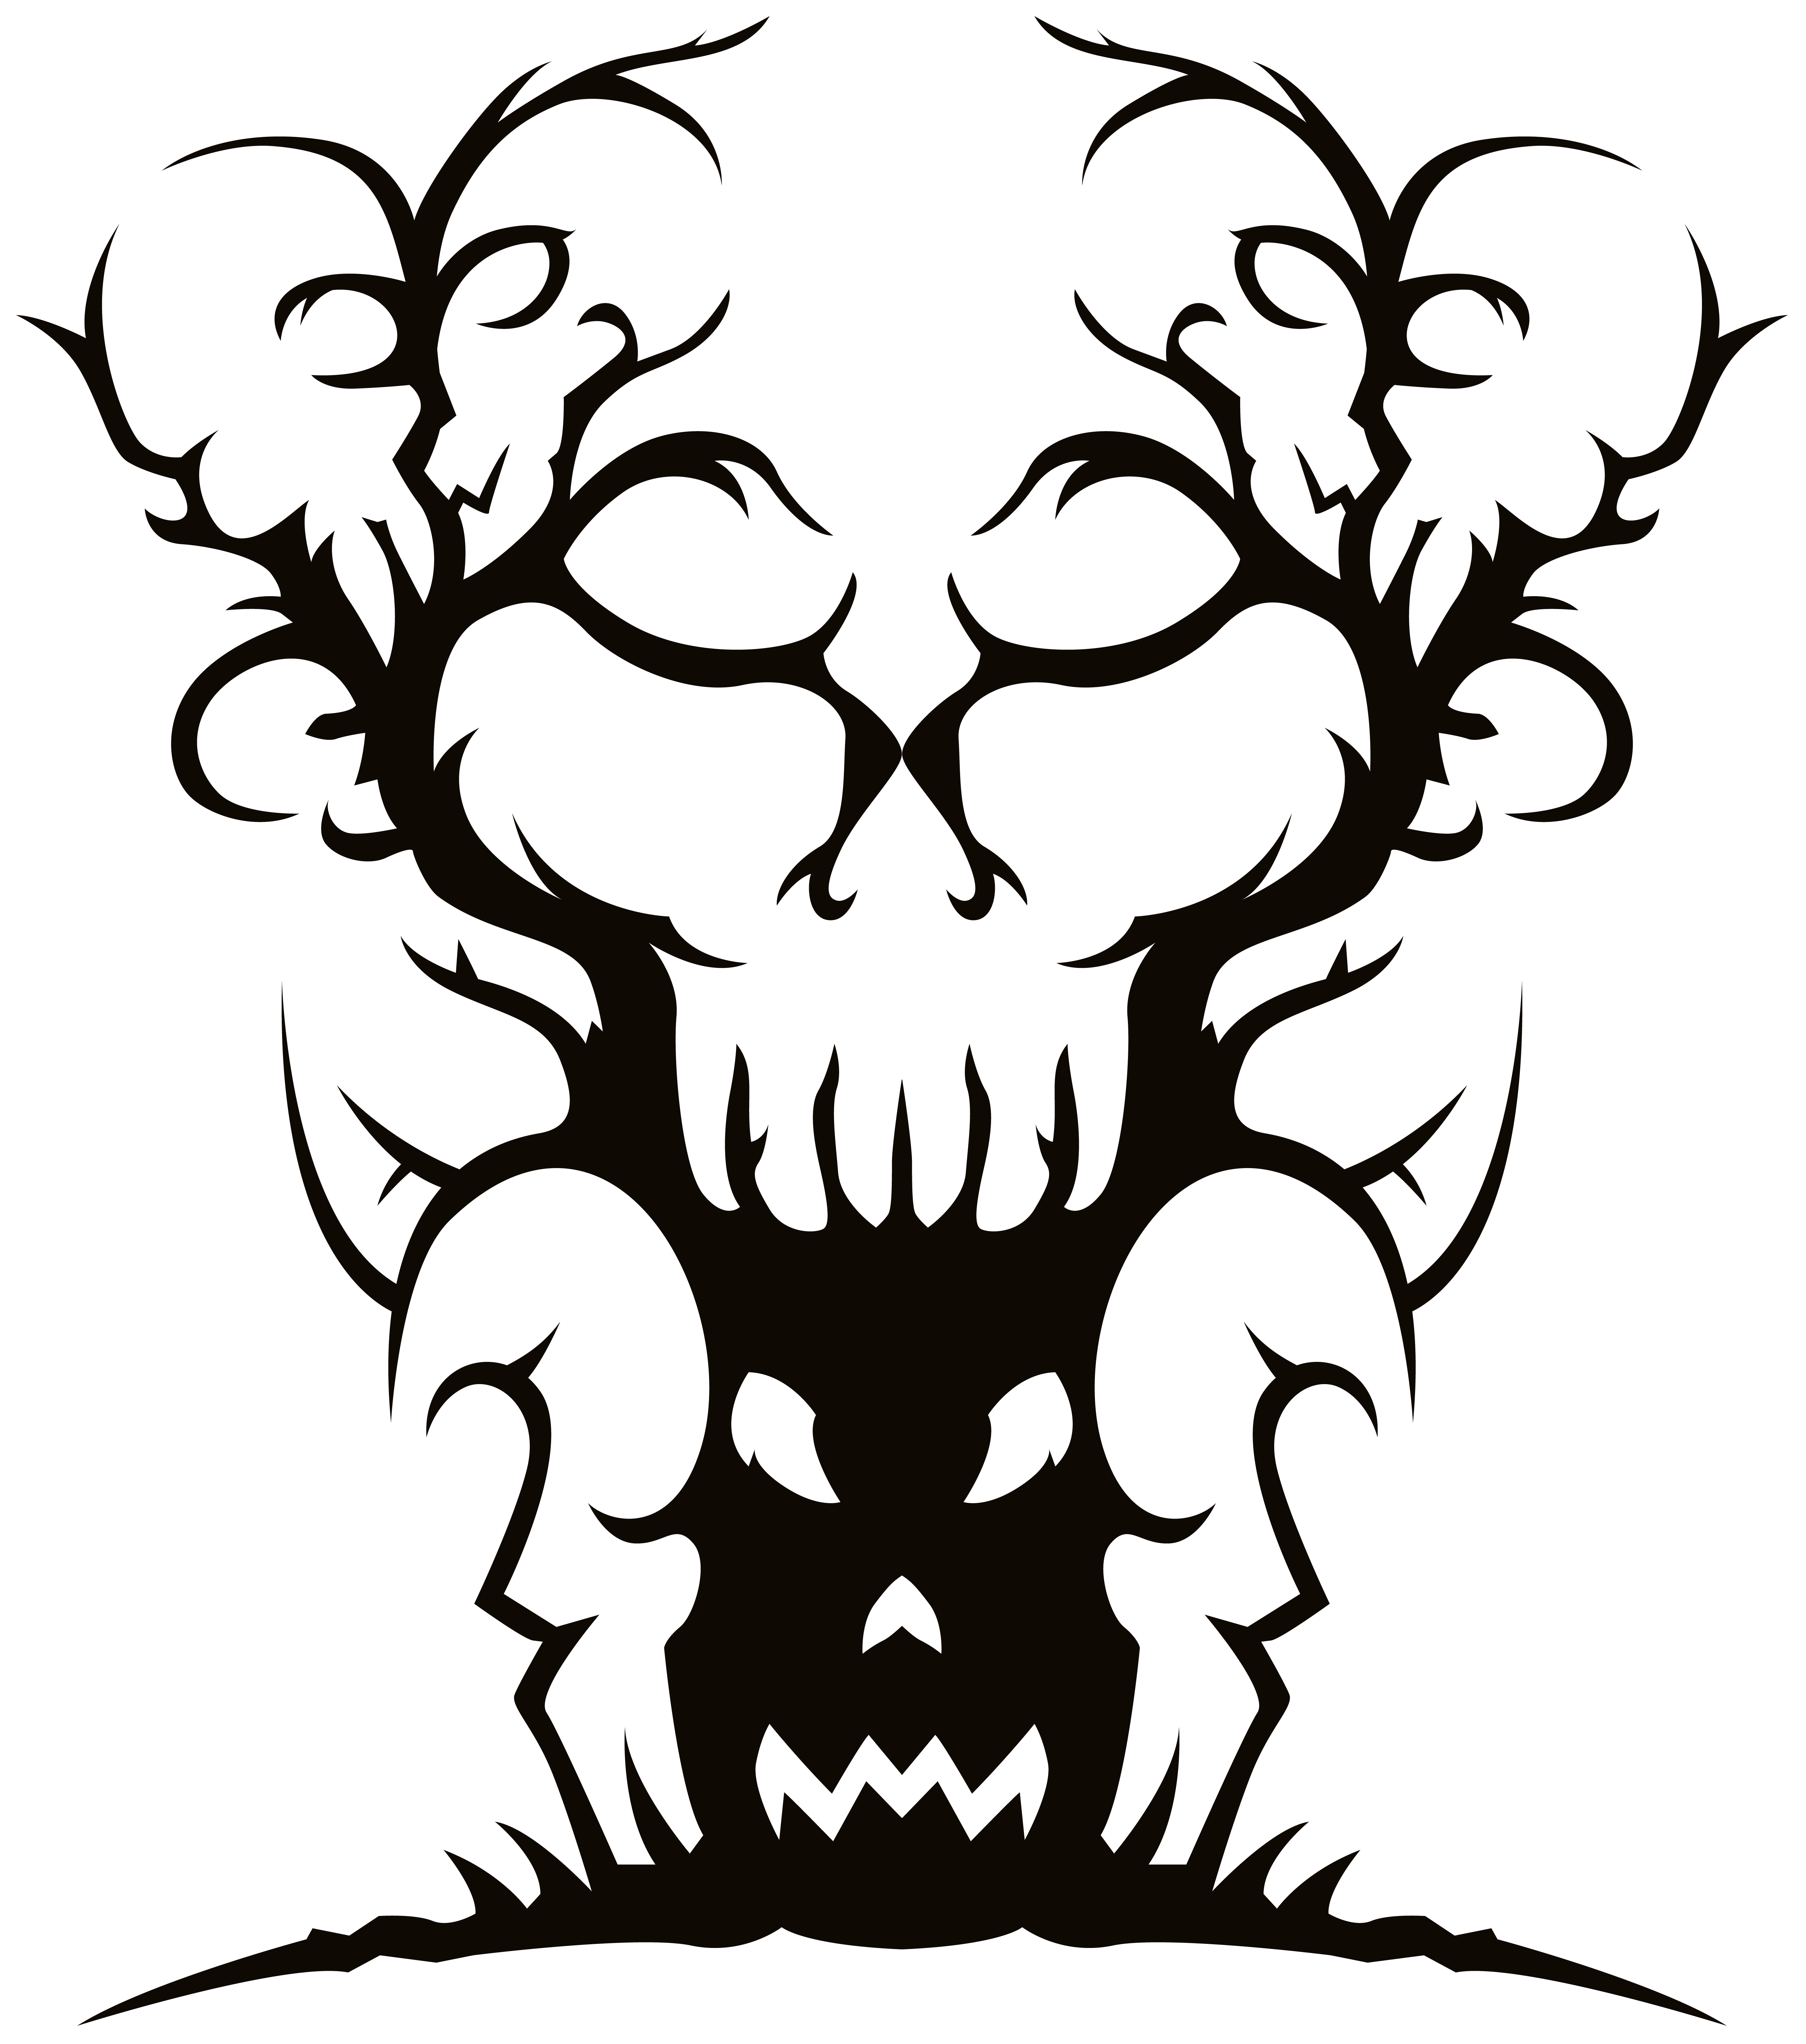 Scary spooky tree png. Spiderweb clipart creepy